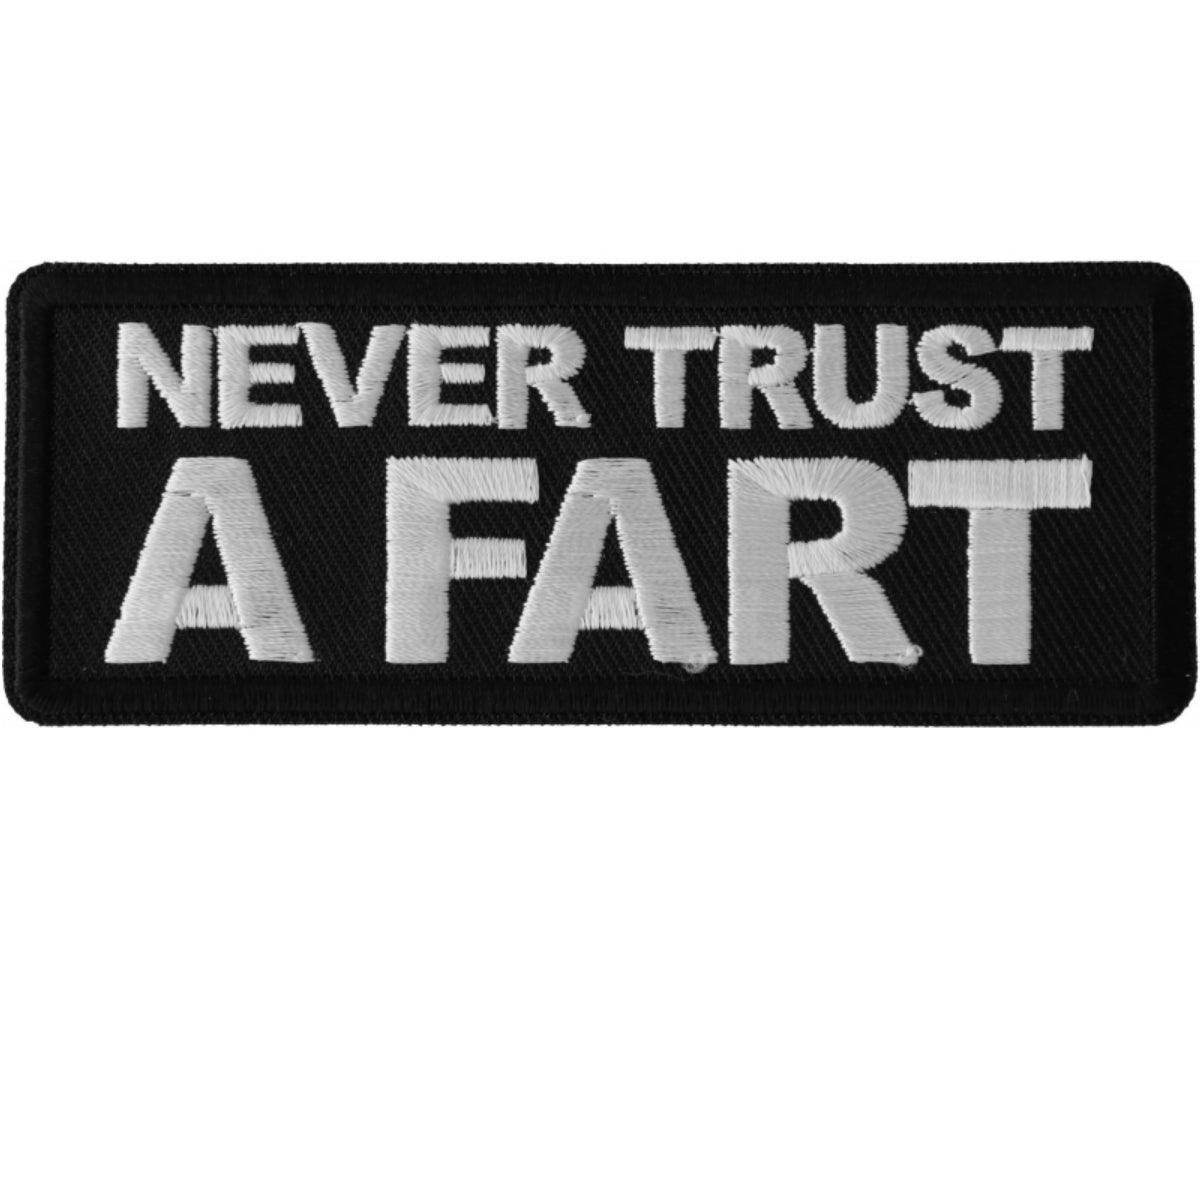 Daniel Smart Never Trust a Fart Embroidered Iron on Patch, 4 x 1.5 inches - American Legend Rider